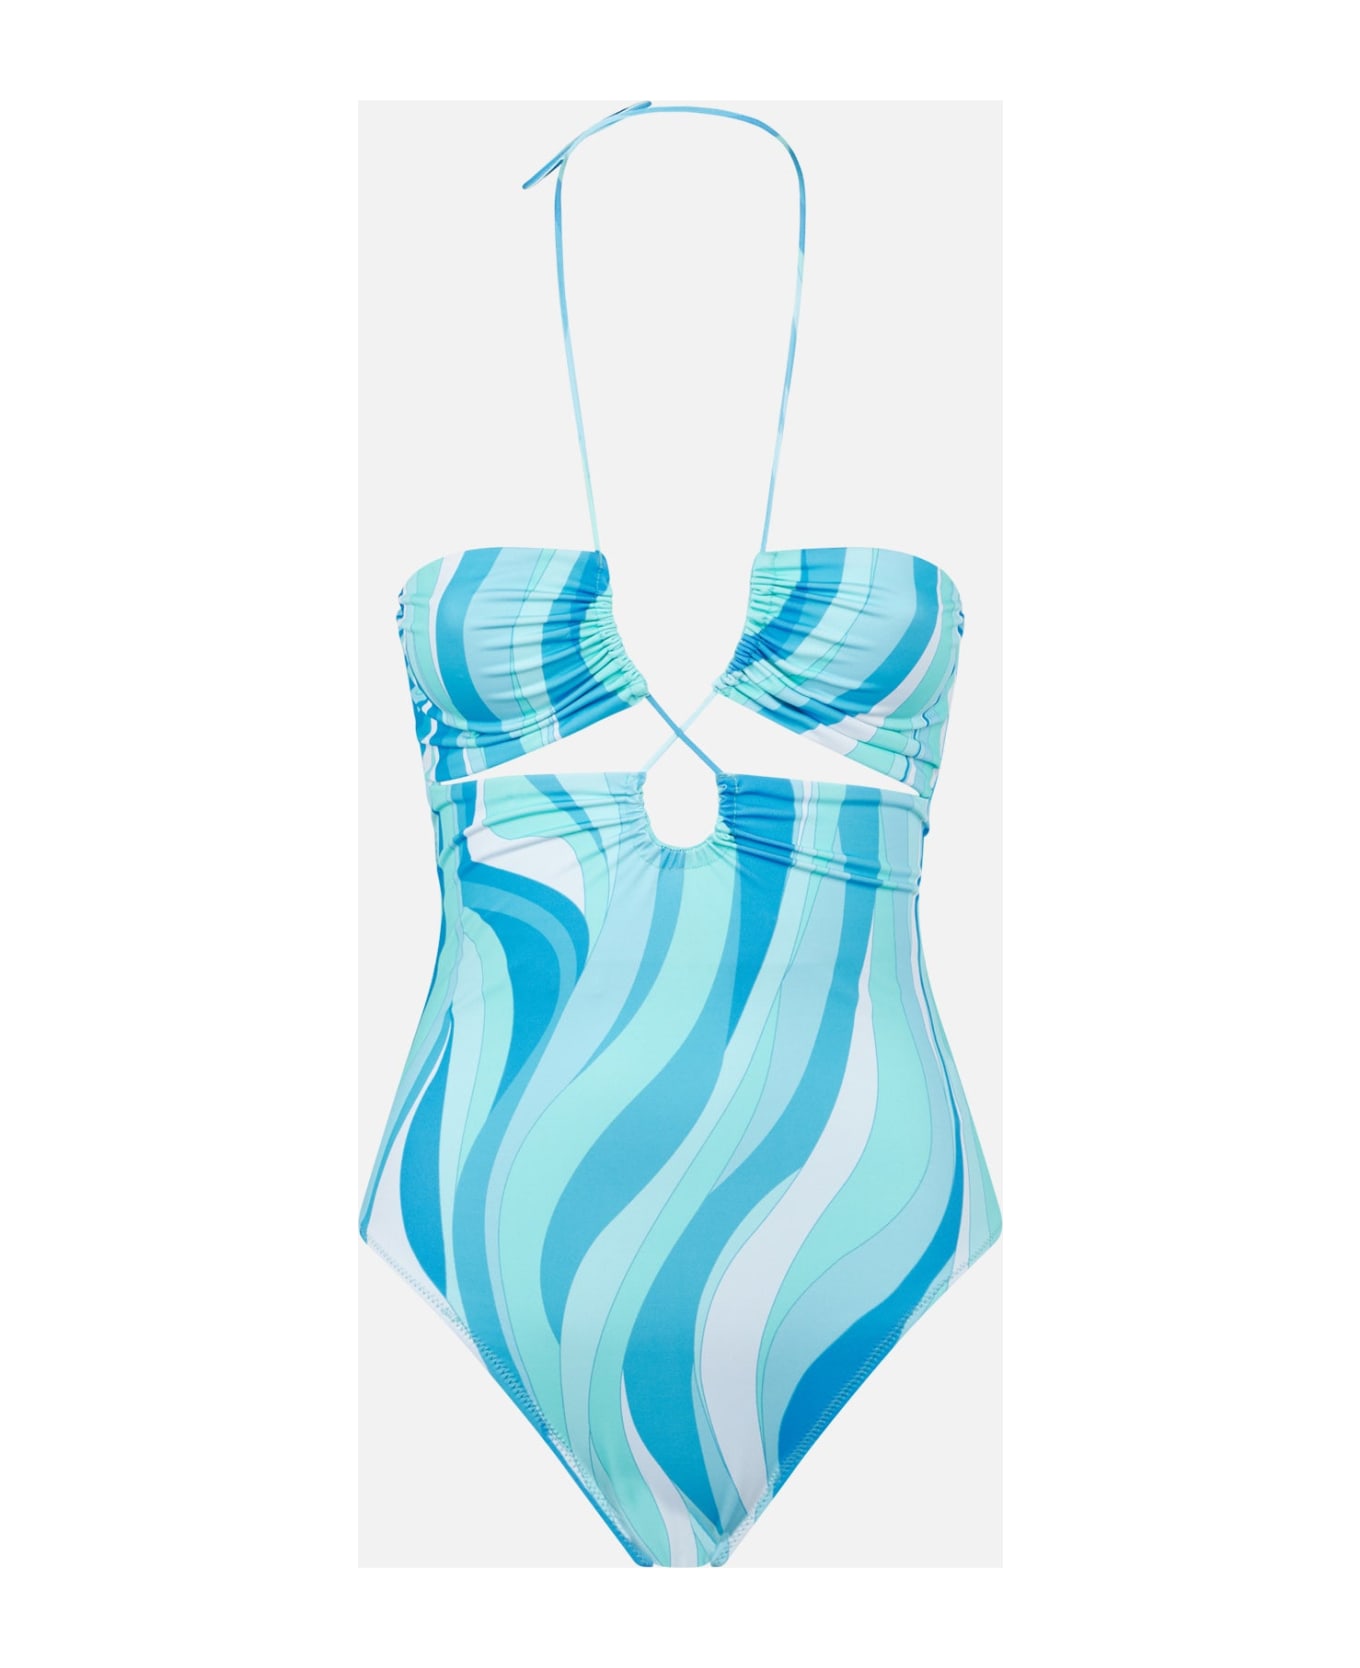 MC2 Saint Barth Cutout One Piece Swimsuit With Wave Print - BLUE ワンピース